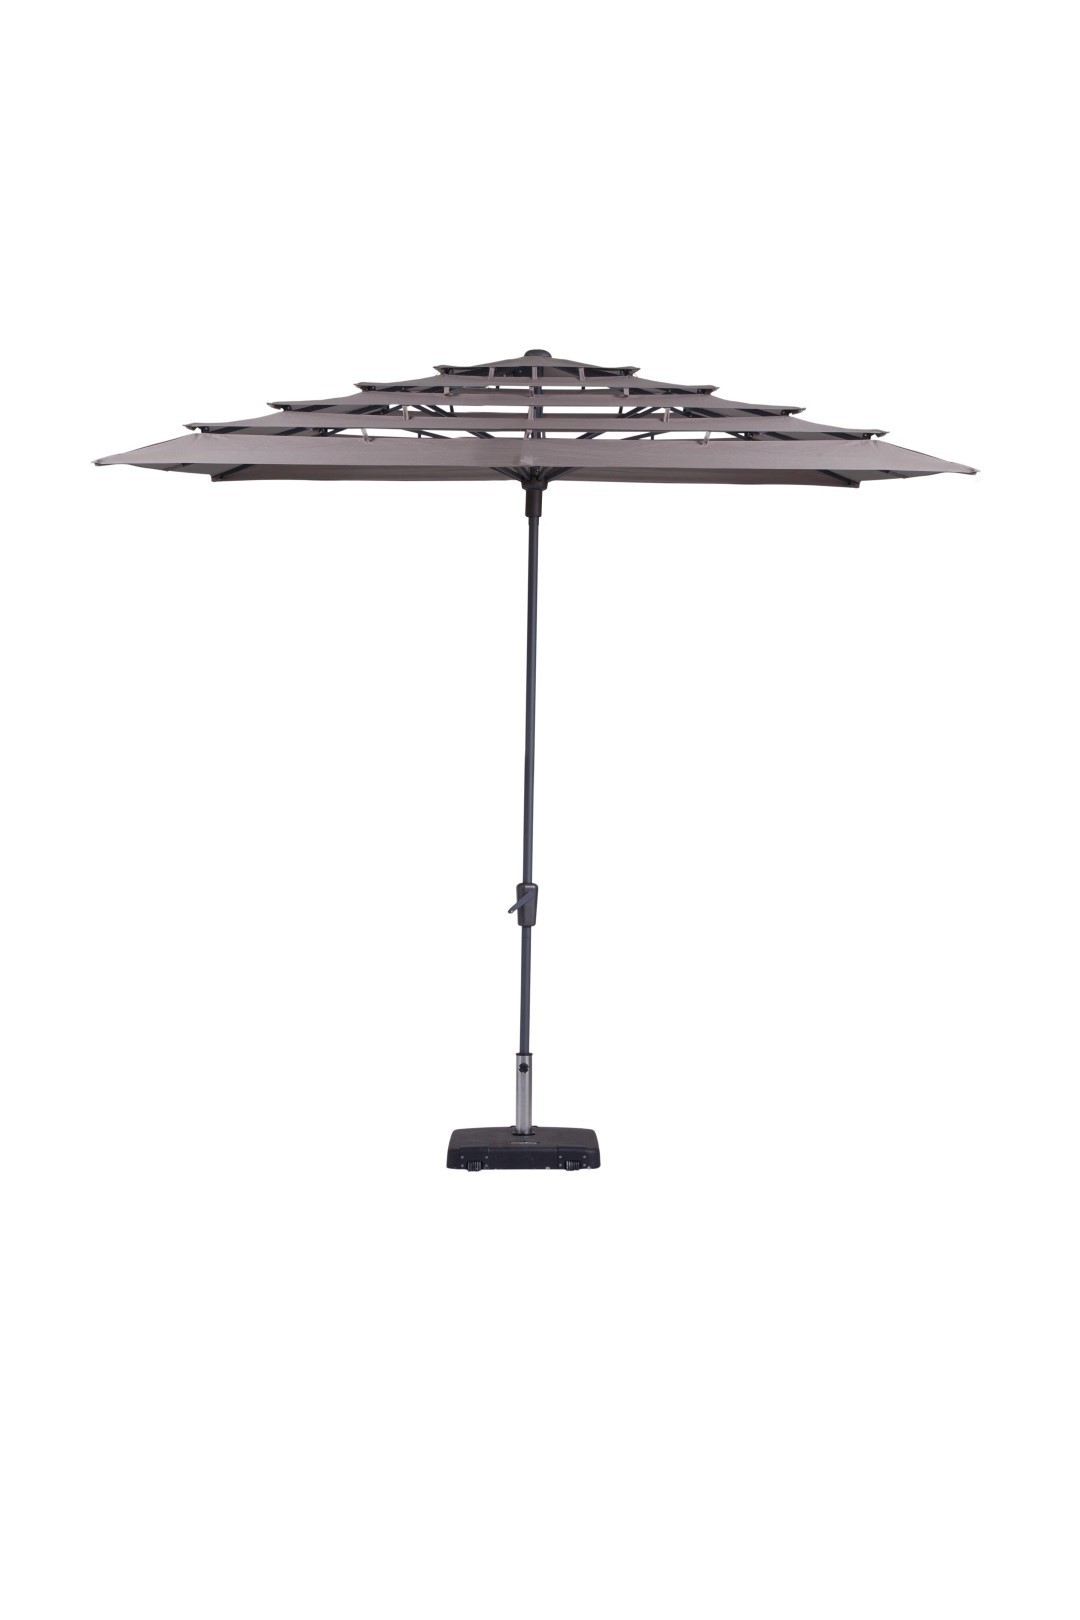 https://www.warentuin.nl/media/catalog/product/S/C/SCAN8713229624712_madison_parasol_syros_open_air_280x280_cm_polyester_taupe_mad_0cb1.jpg